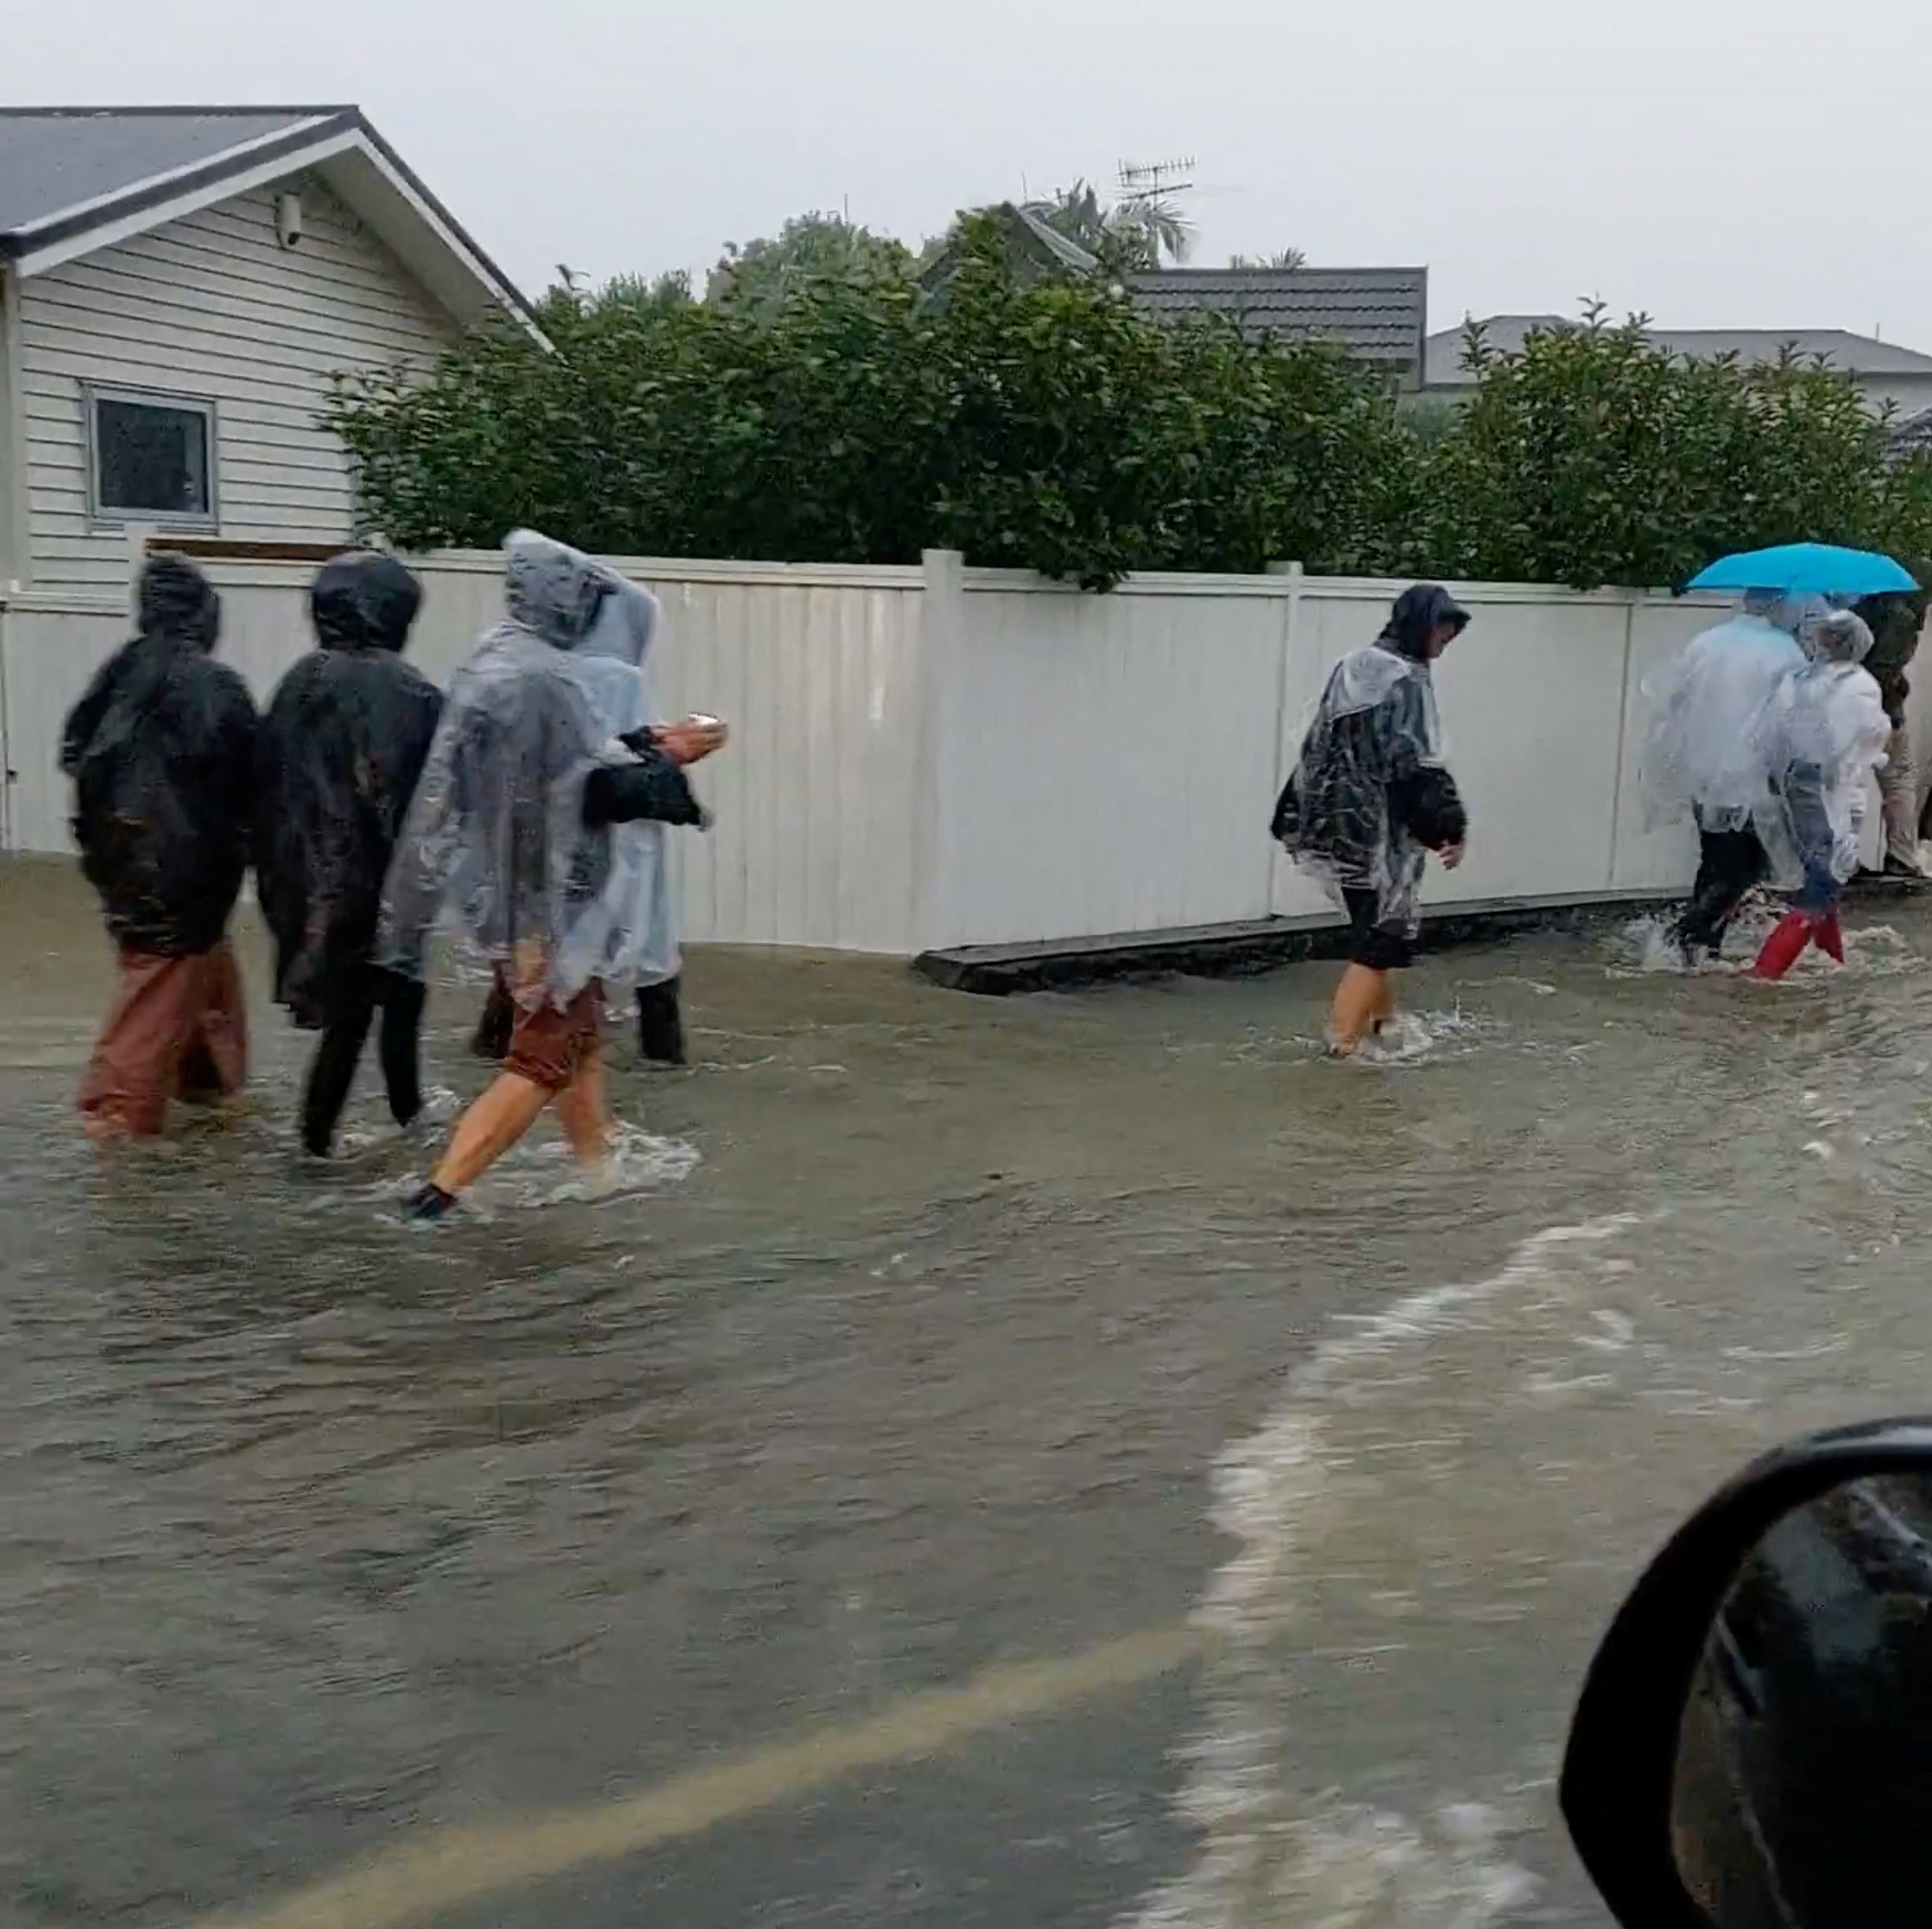 People walk on a flooded street after Elton John’s concert was canceled due to bad weather, in Auckland